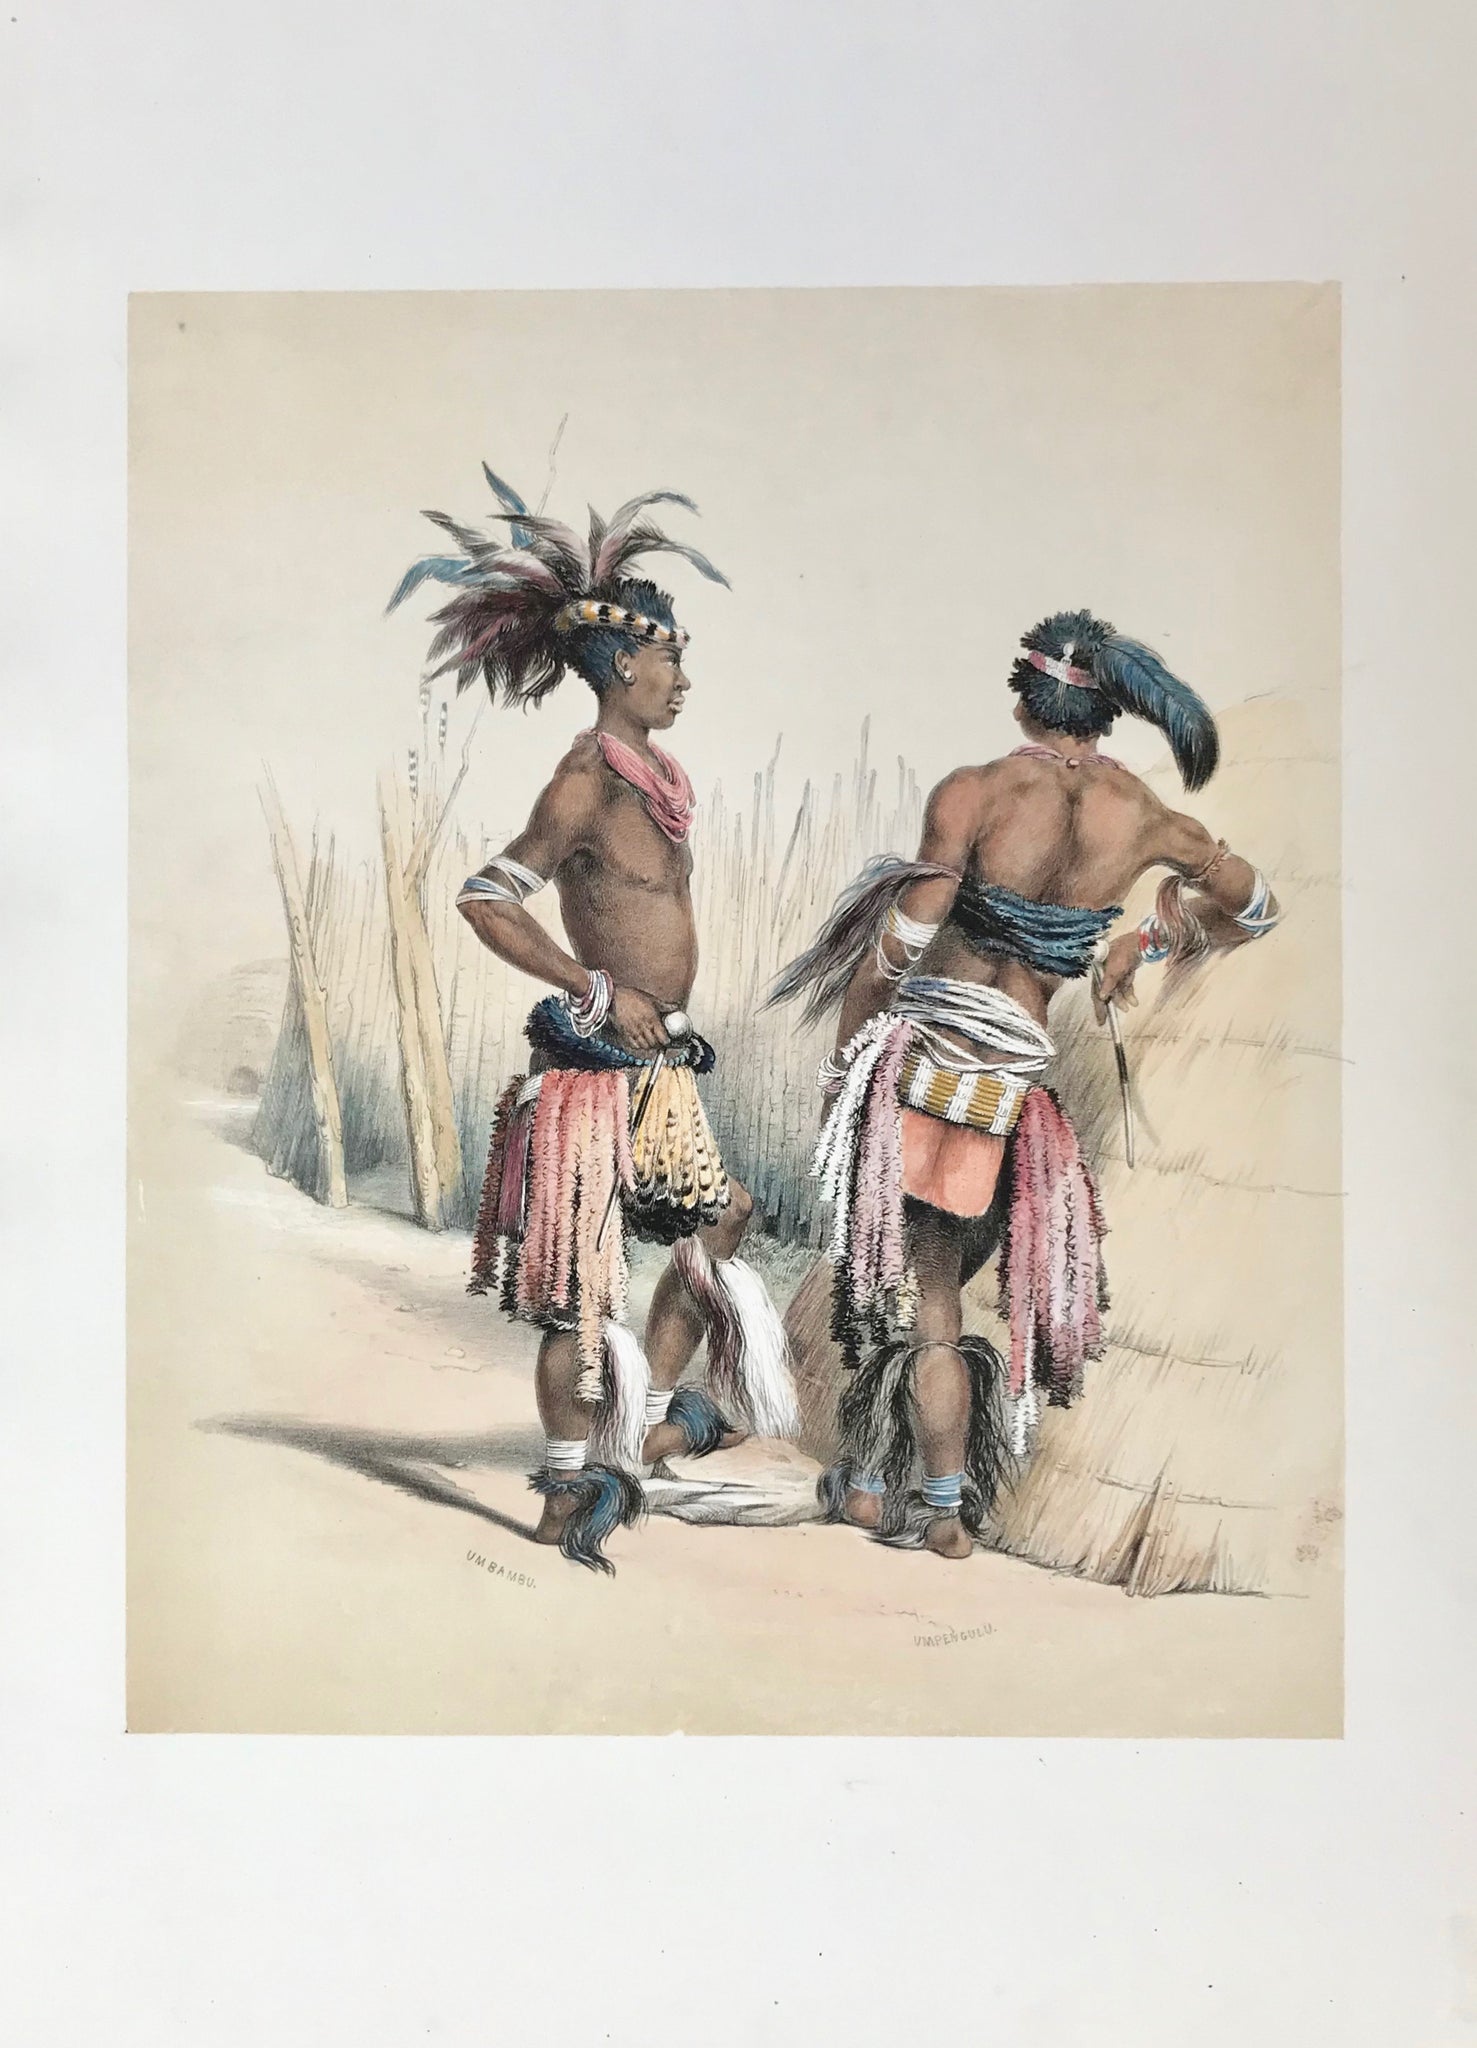 "Umbambu and Umpengulu, young Zulus in their dancing costume"  Toned lithograph and hand-colored, heightened with gum arabic  After the drawing by George French Angas (1822-1886)  Clean with some spotting and minimal traces of age and use in margins.  "The Kafirs Illustrated in a Series of Drawings - The Amazulu, The Amaponda, ad Amakosa Trbes also Portraits of the Hottentot, Malay, Fingo, and other Races Inhabiting Southern Africa"